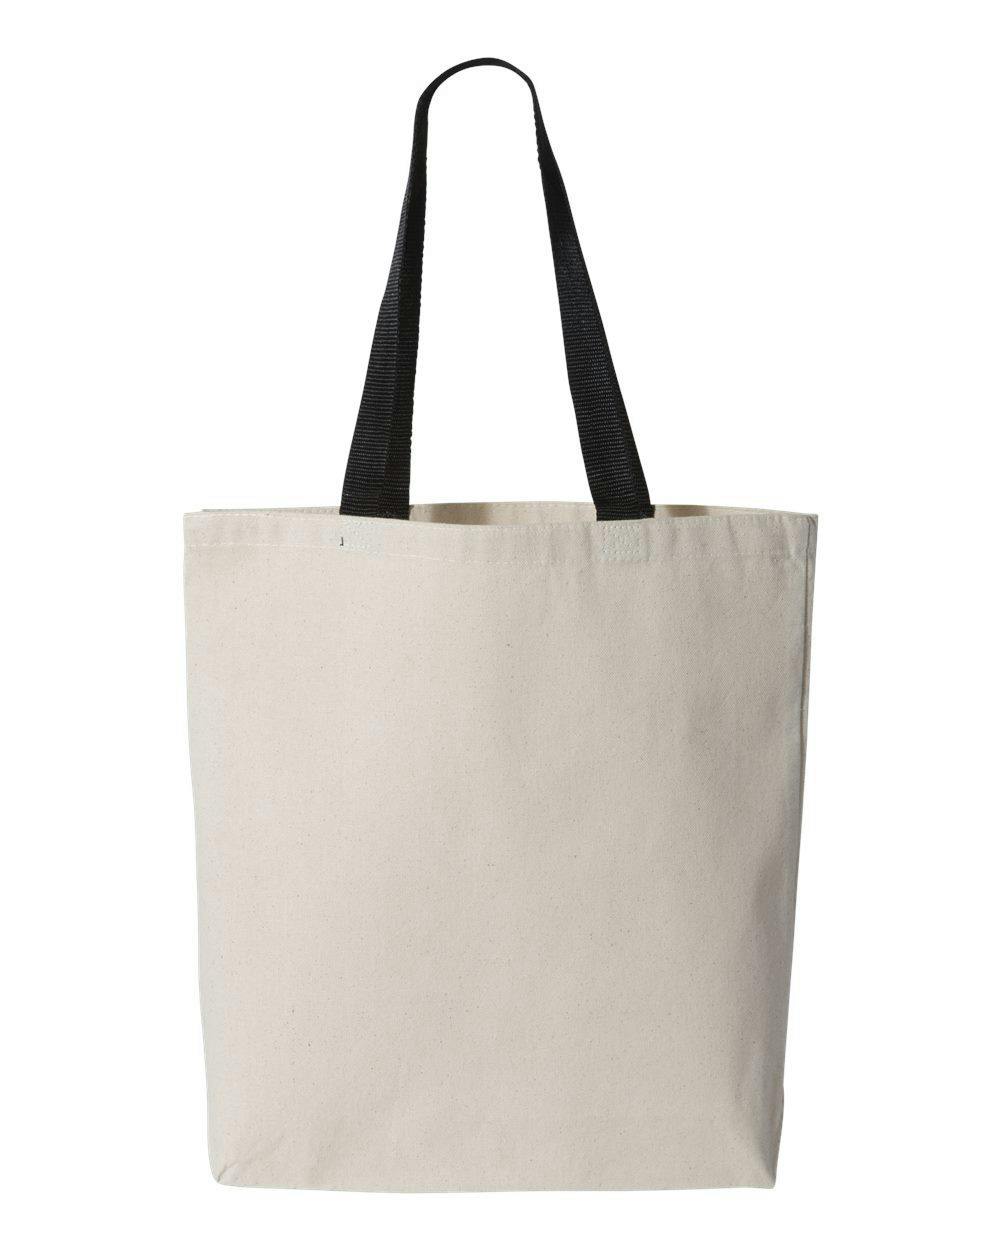 Image for 11L Canvas Tote with Contrast-Color Handles - Q4400